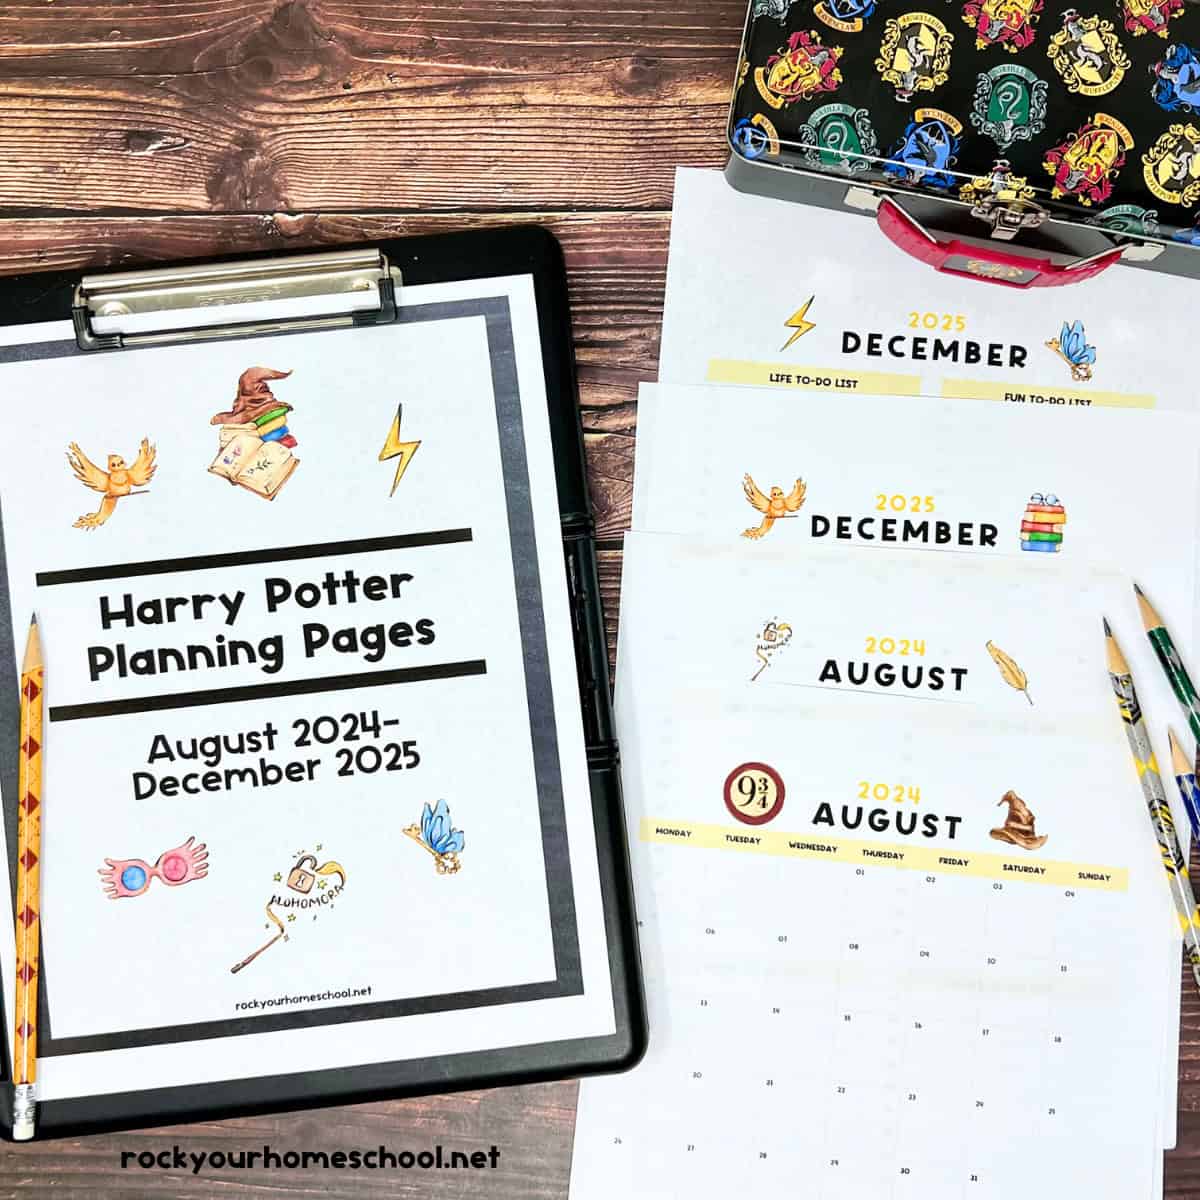 Harry Potter planning pages cover for August 2024 through December 2025 on black clipboard with example pages and pencils and pencil case.